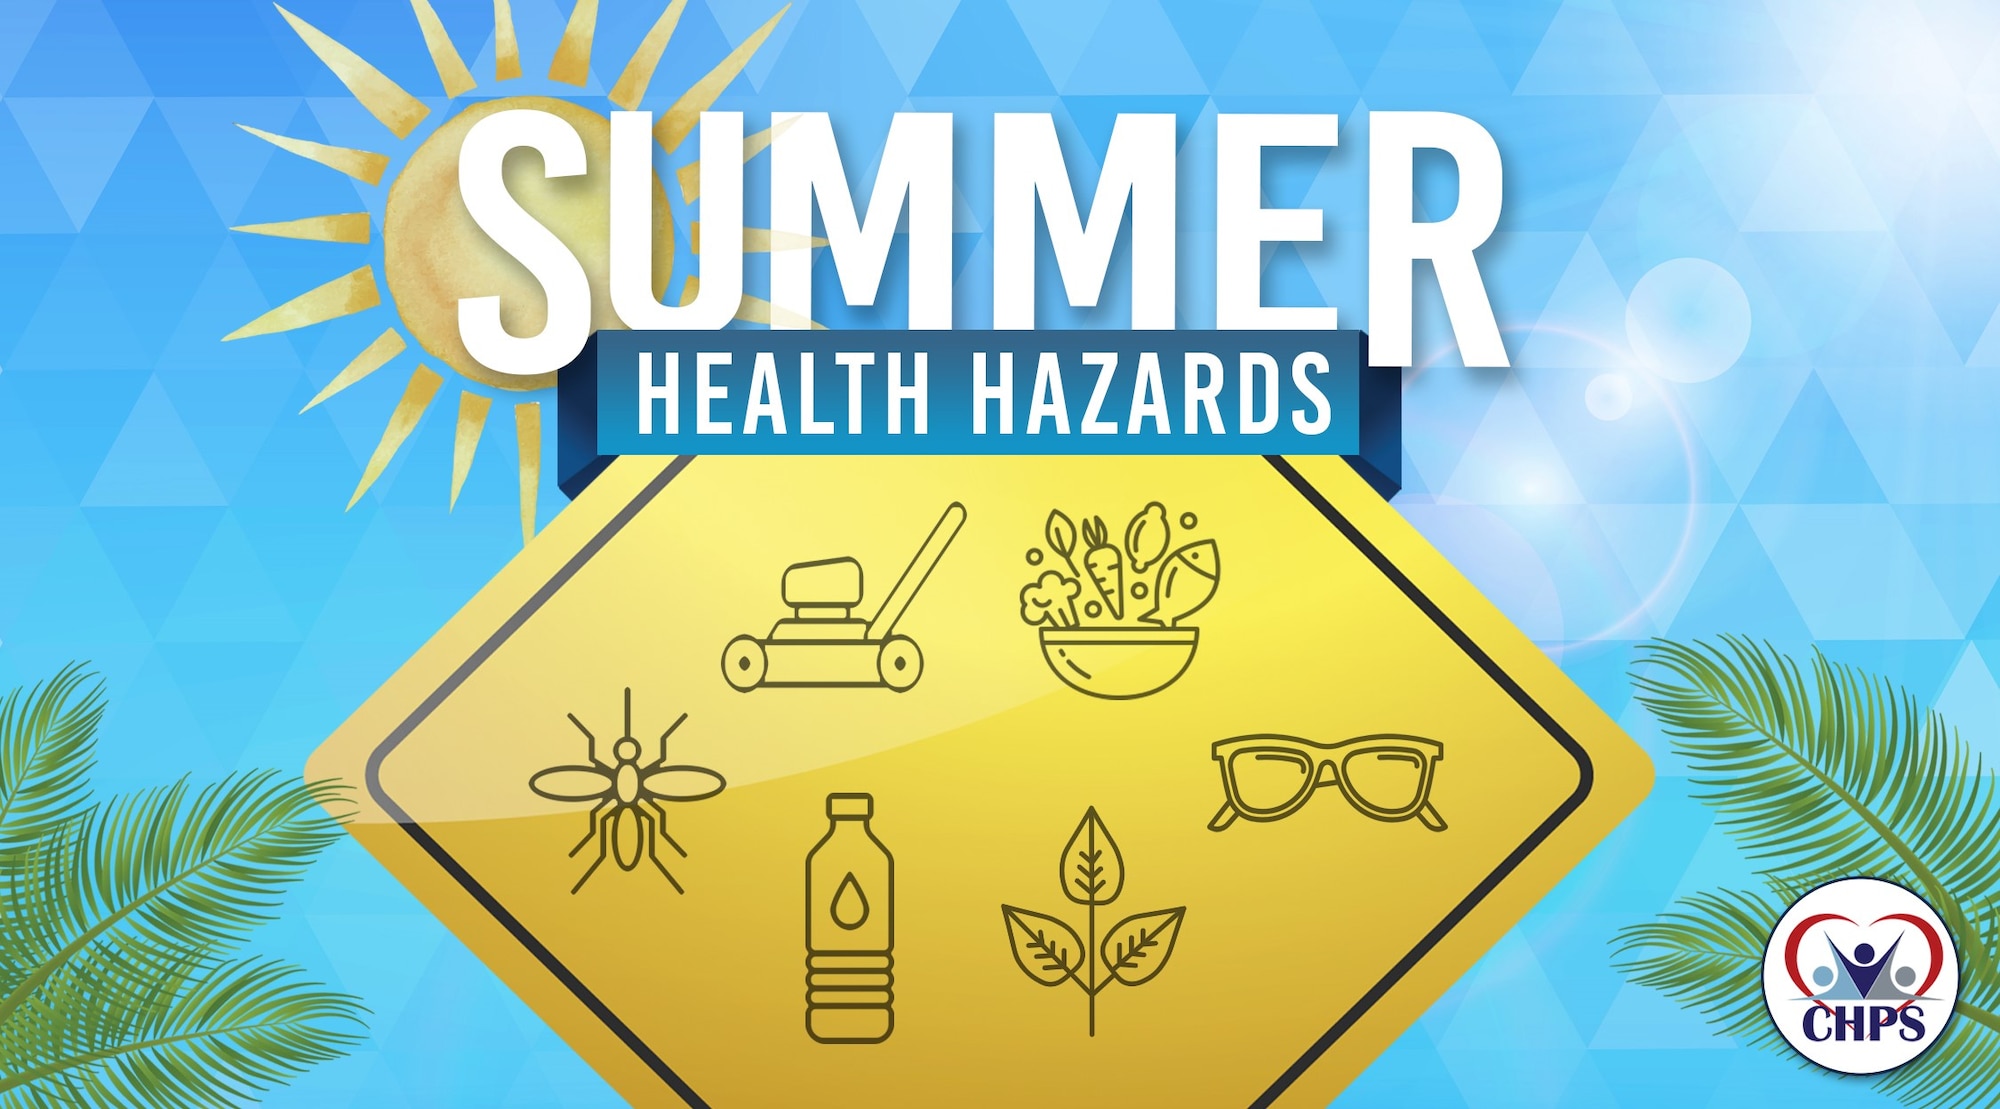 Being aware of summer hazards can make avoiding them easier and adds to summer fun, whether working or playing outside.